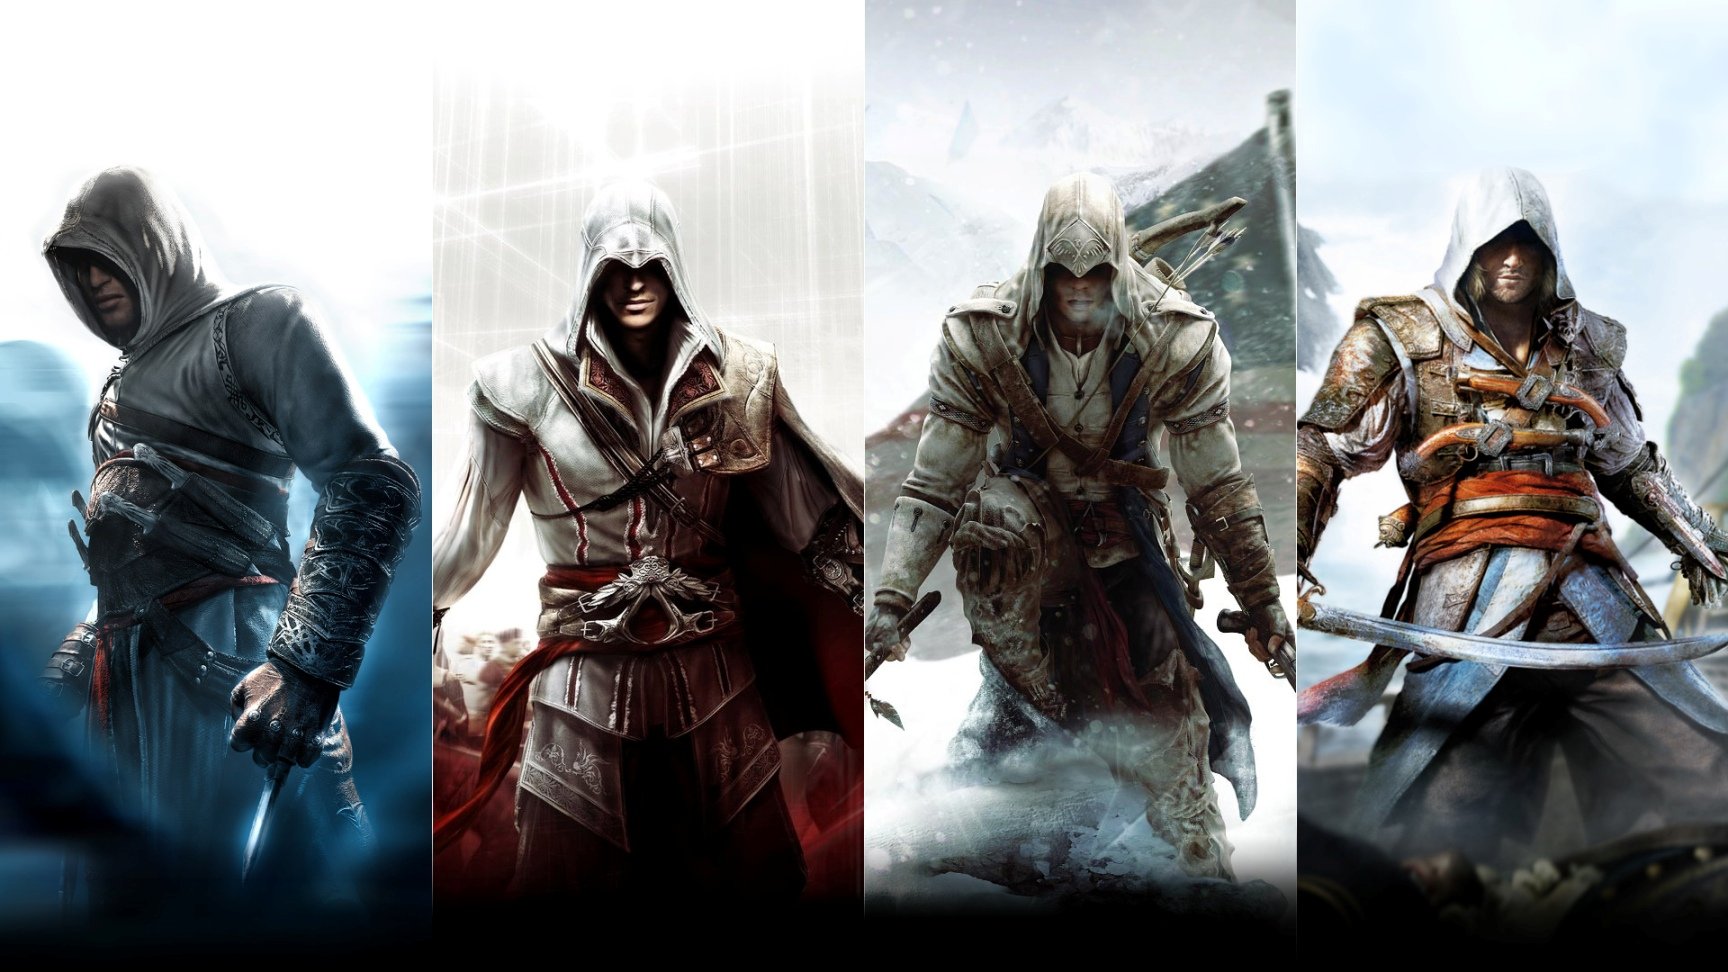 assassins creed game free download full version for pc windows 10